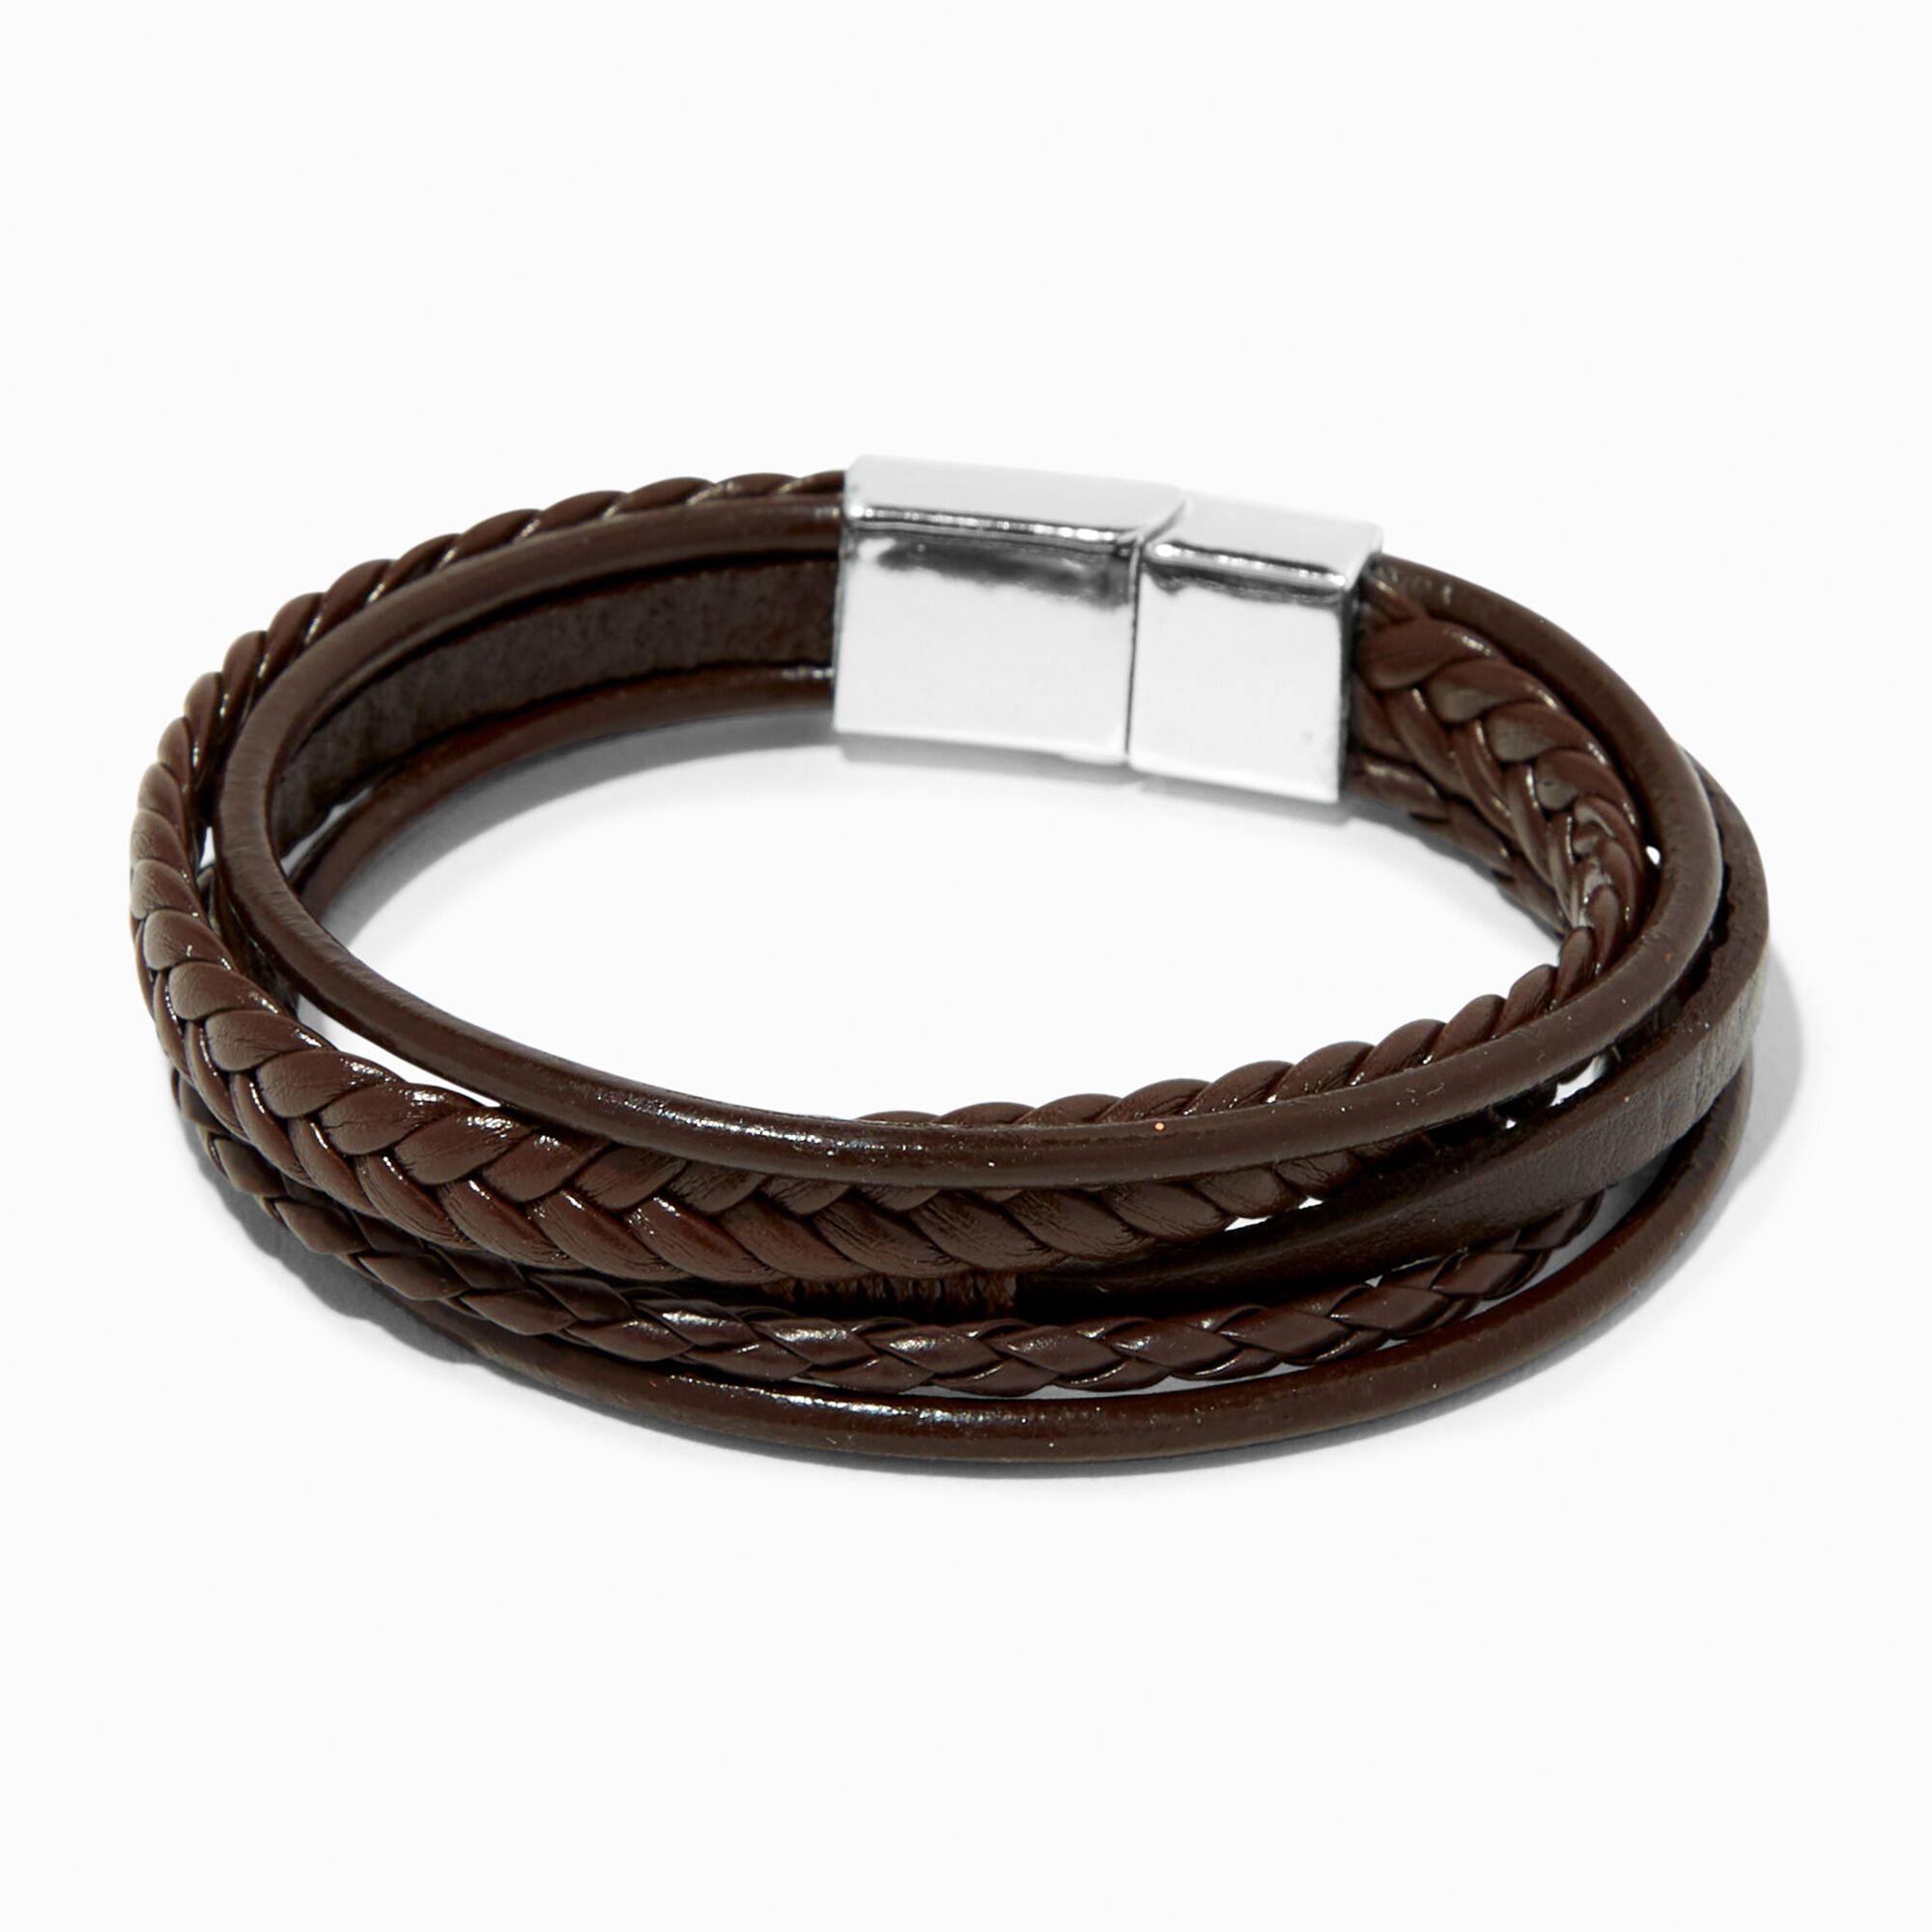 Leather wrap bracelet with charms - buy online at Crowded Silver